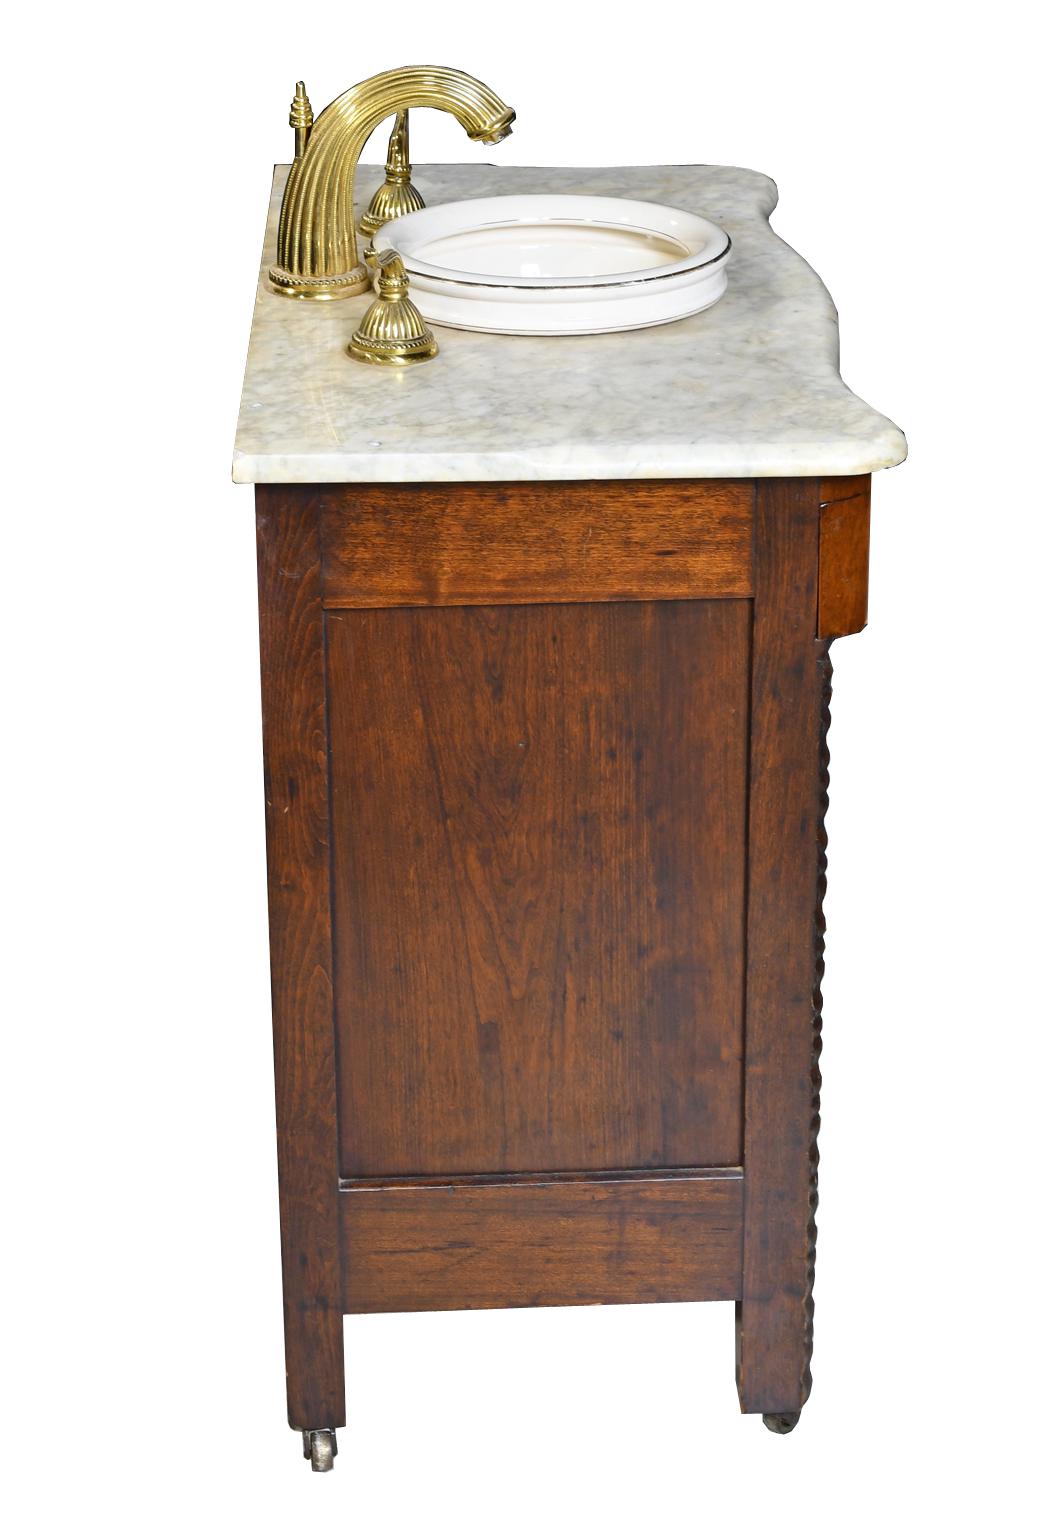 19th Century Antique Victorian Walnut Cabinet w/ White Marble Top Adapted with Sink & Faucet